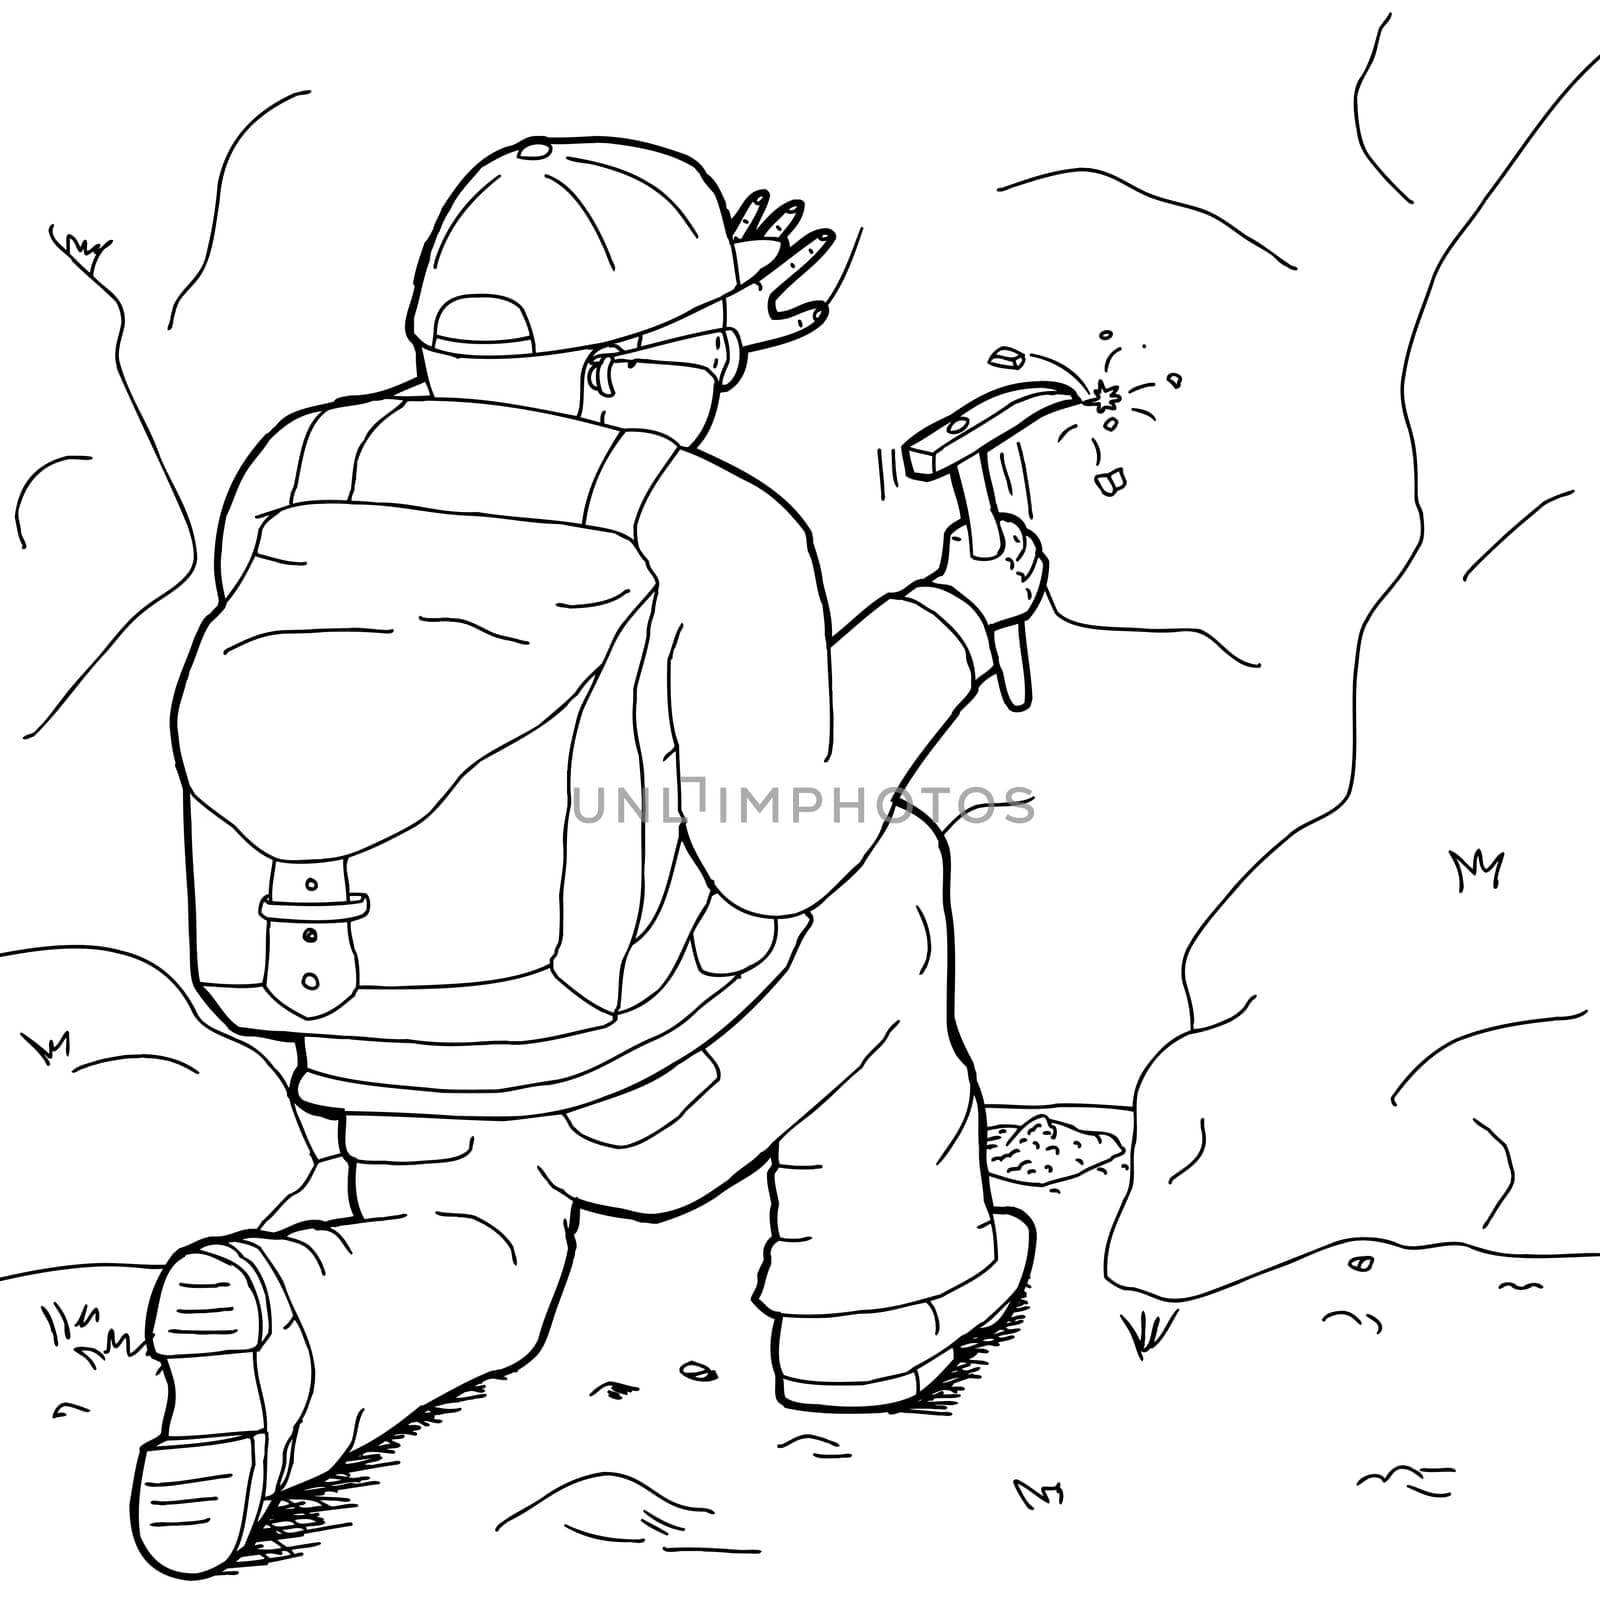 Outline Cartoon of Geologist Working by TheBlackRhino